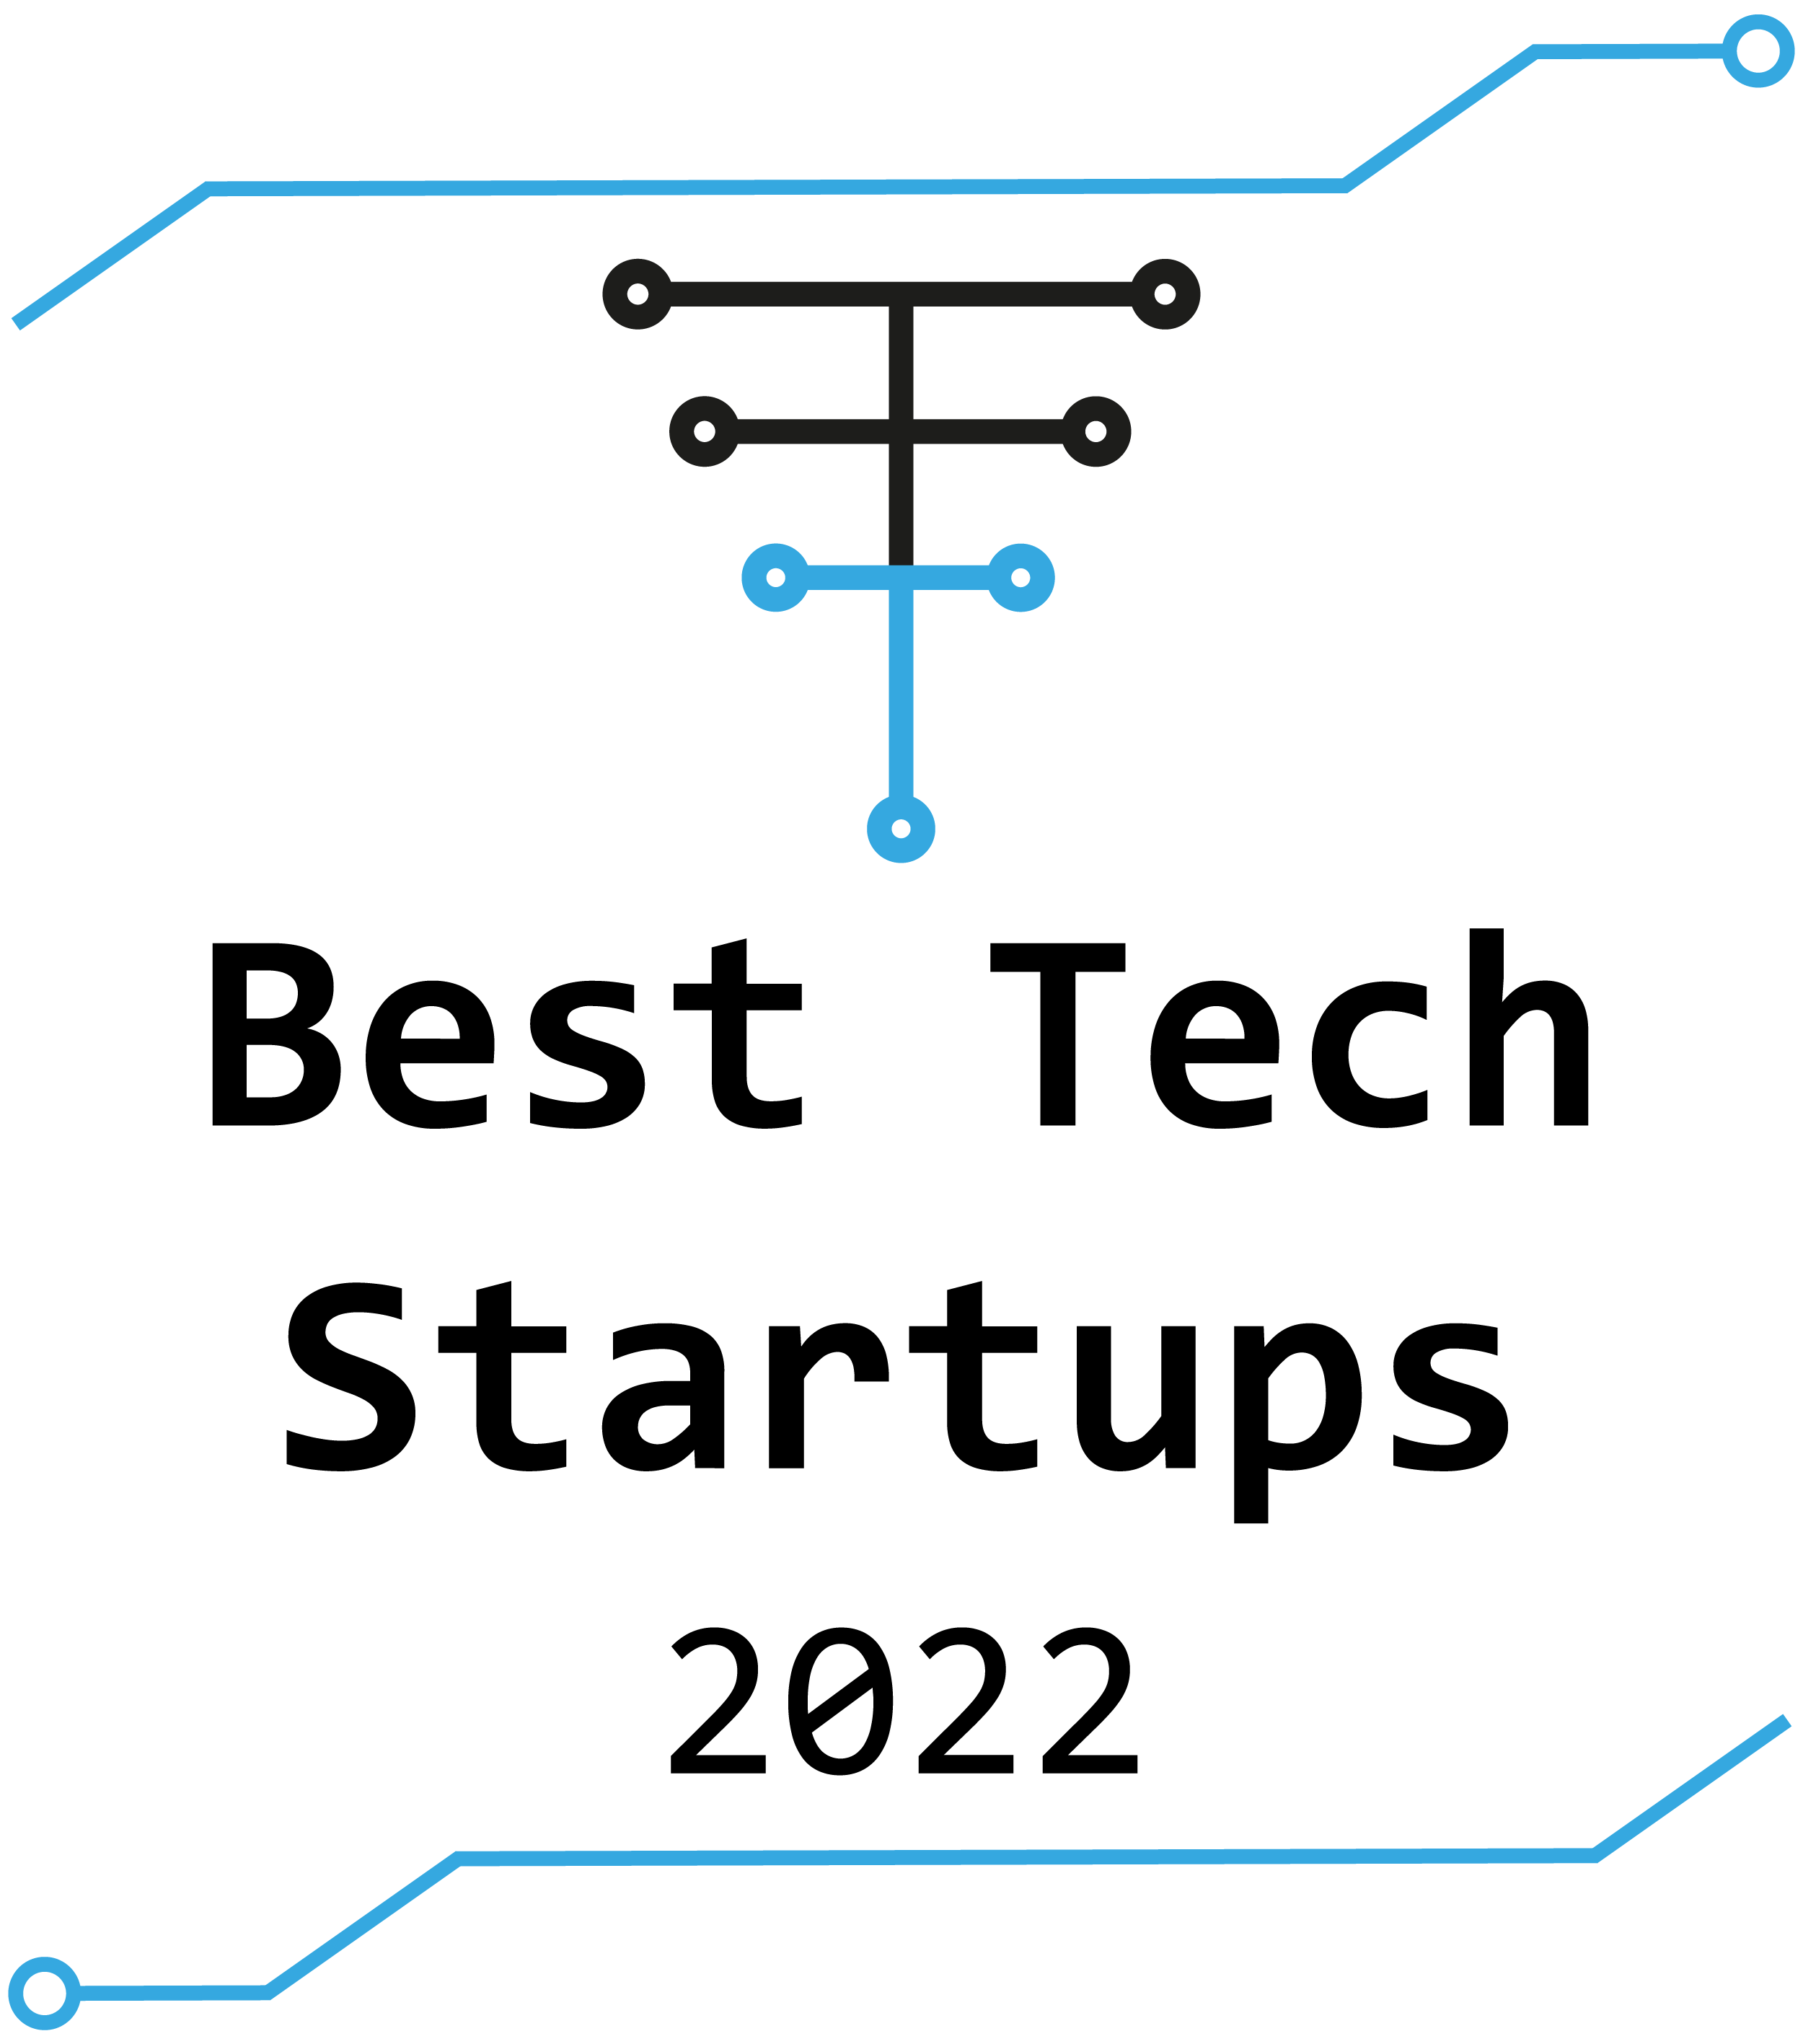 EvidenceCare & Co-Founders Recognized as Best Tech Startup